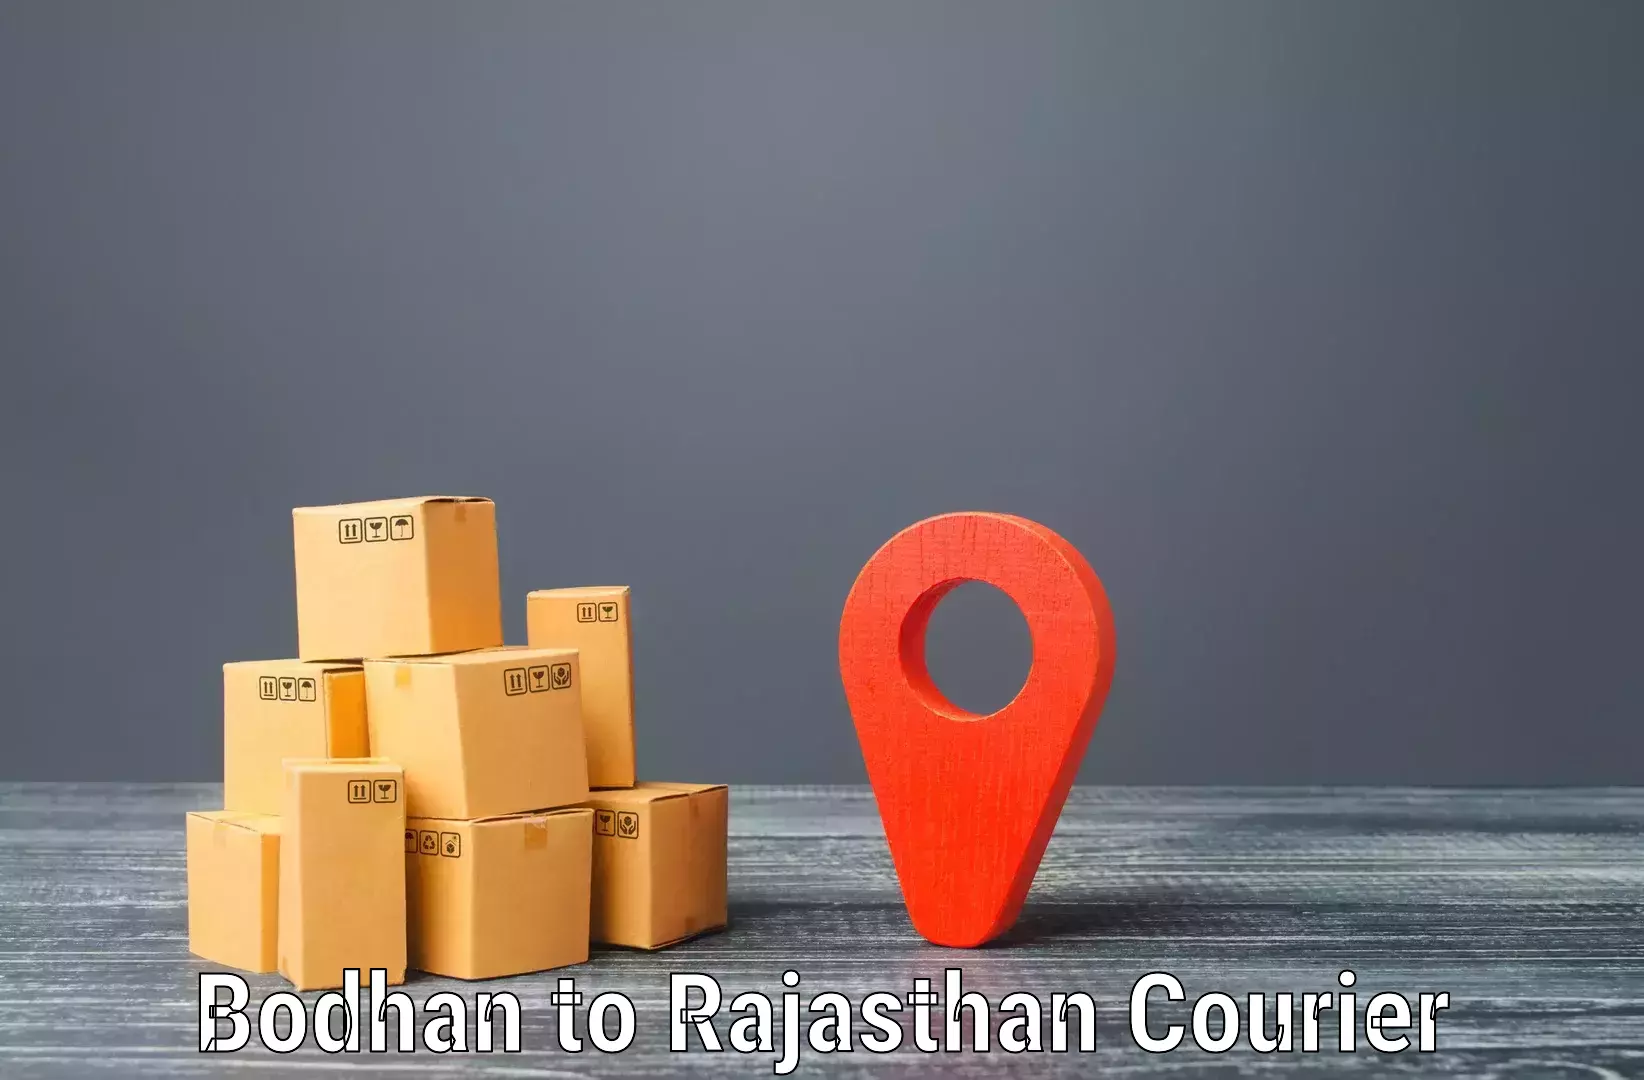 Local delivery service Bodhan to Kalwar